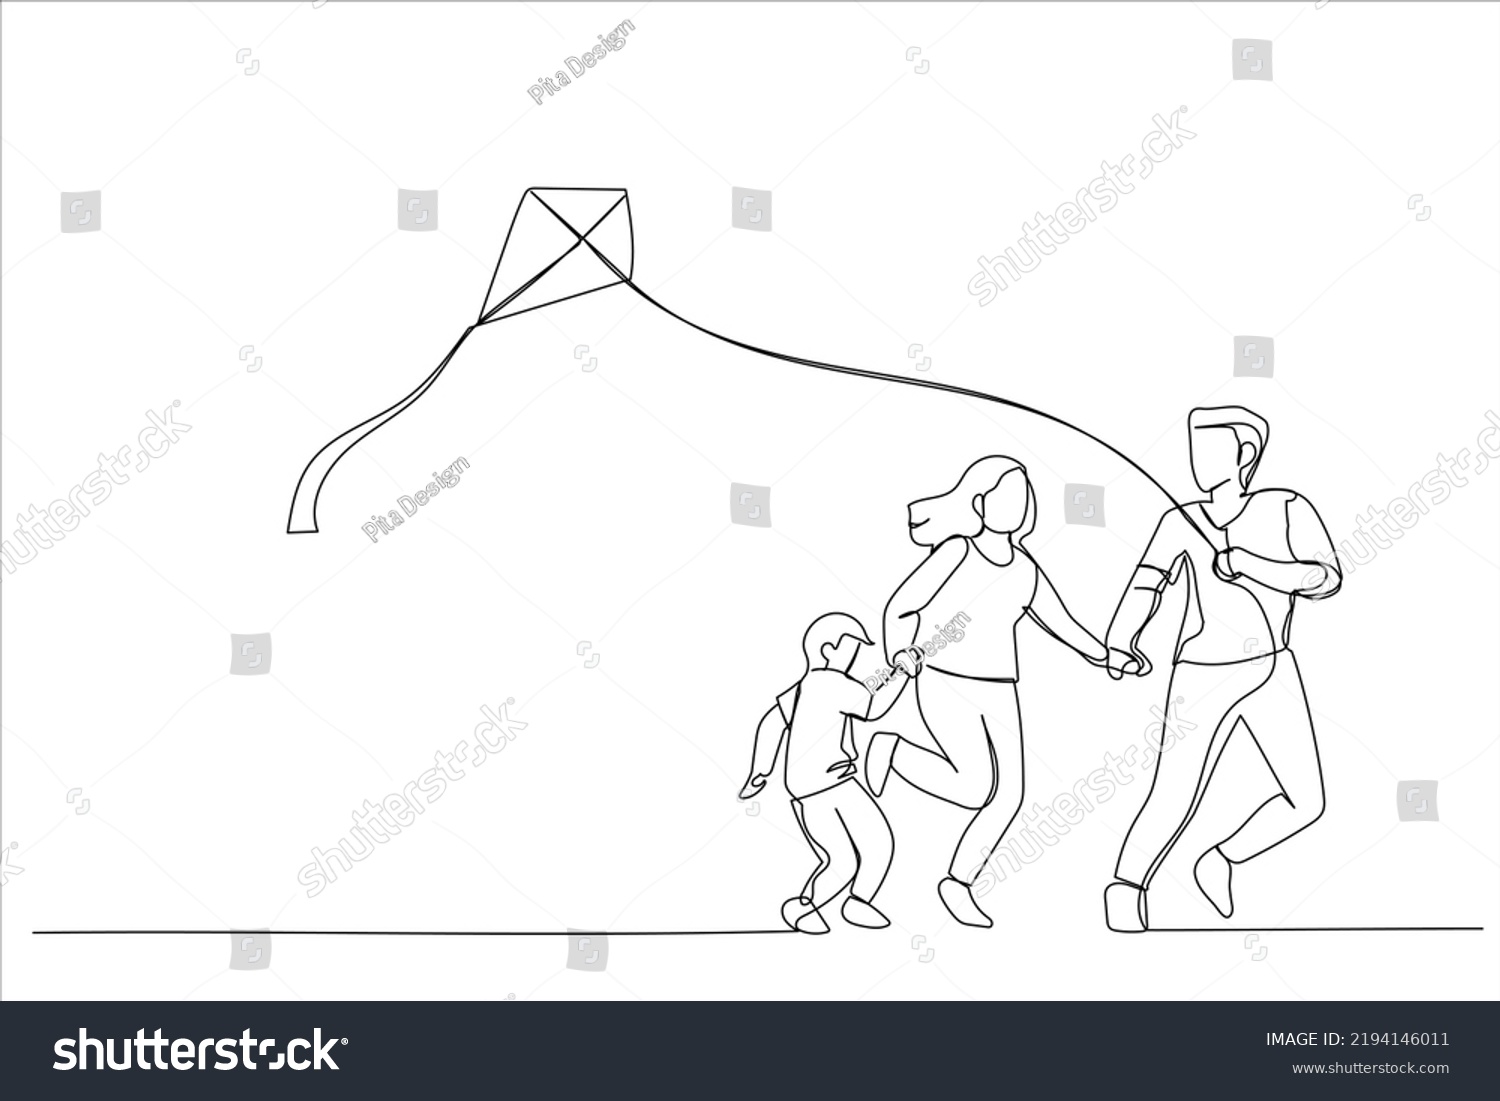 SVG of Illustration of father, mother and kid flying a kite outdoor. One line art style
 svg